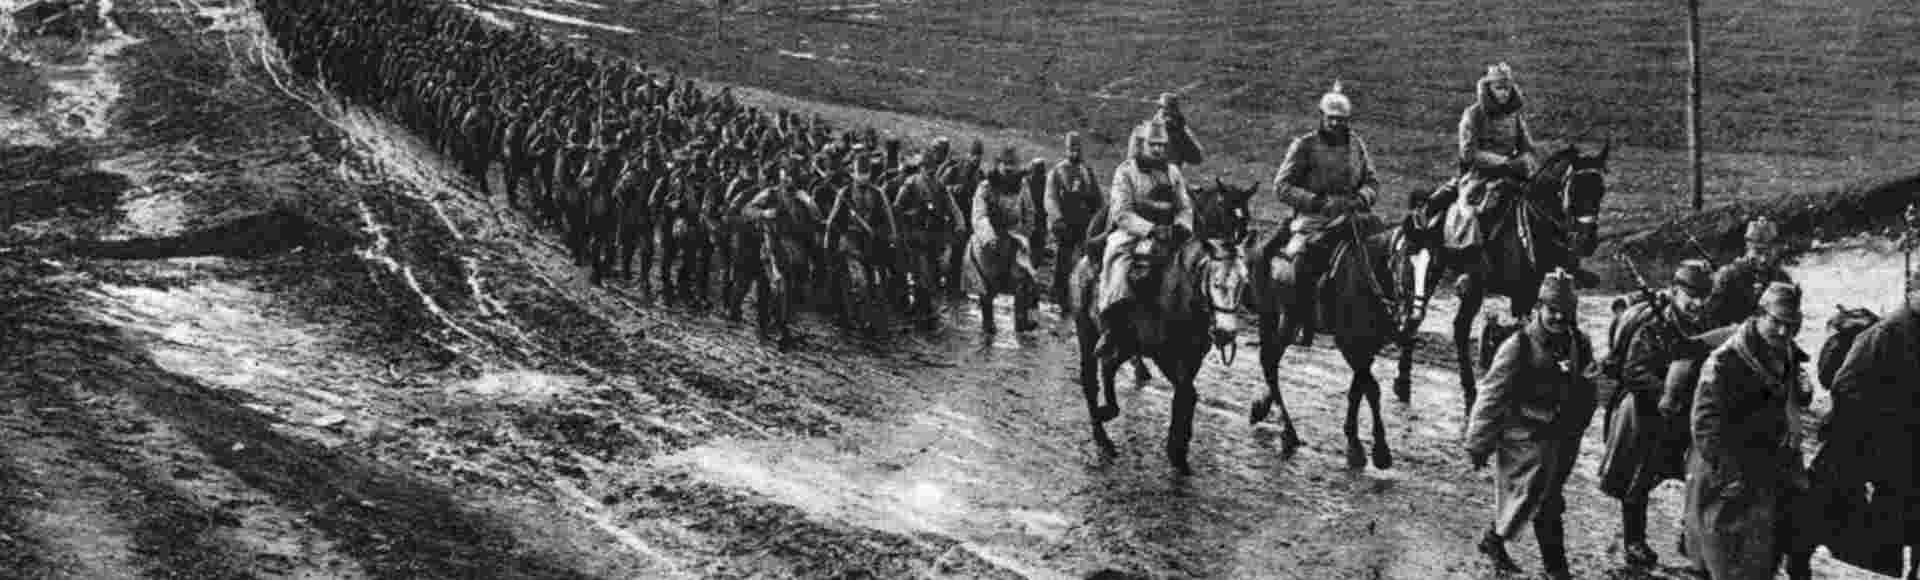 German troops marching through Russia during the First World War.